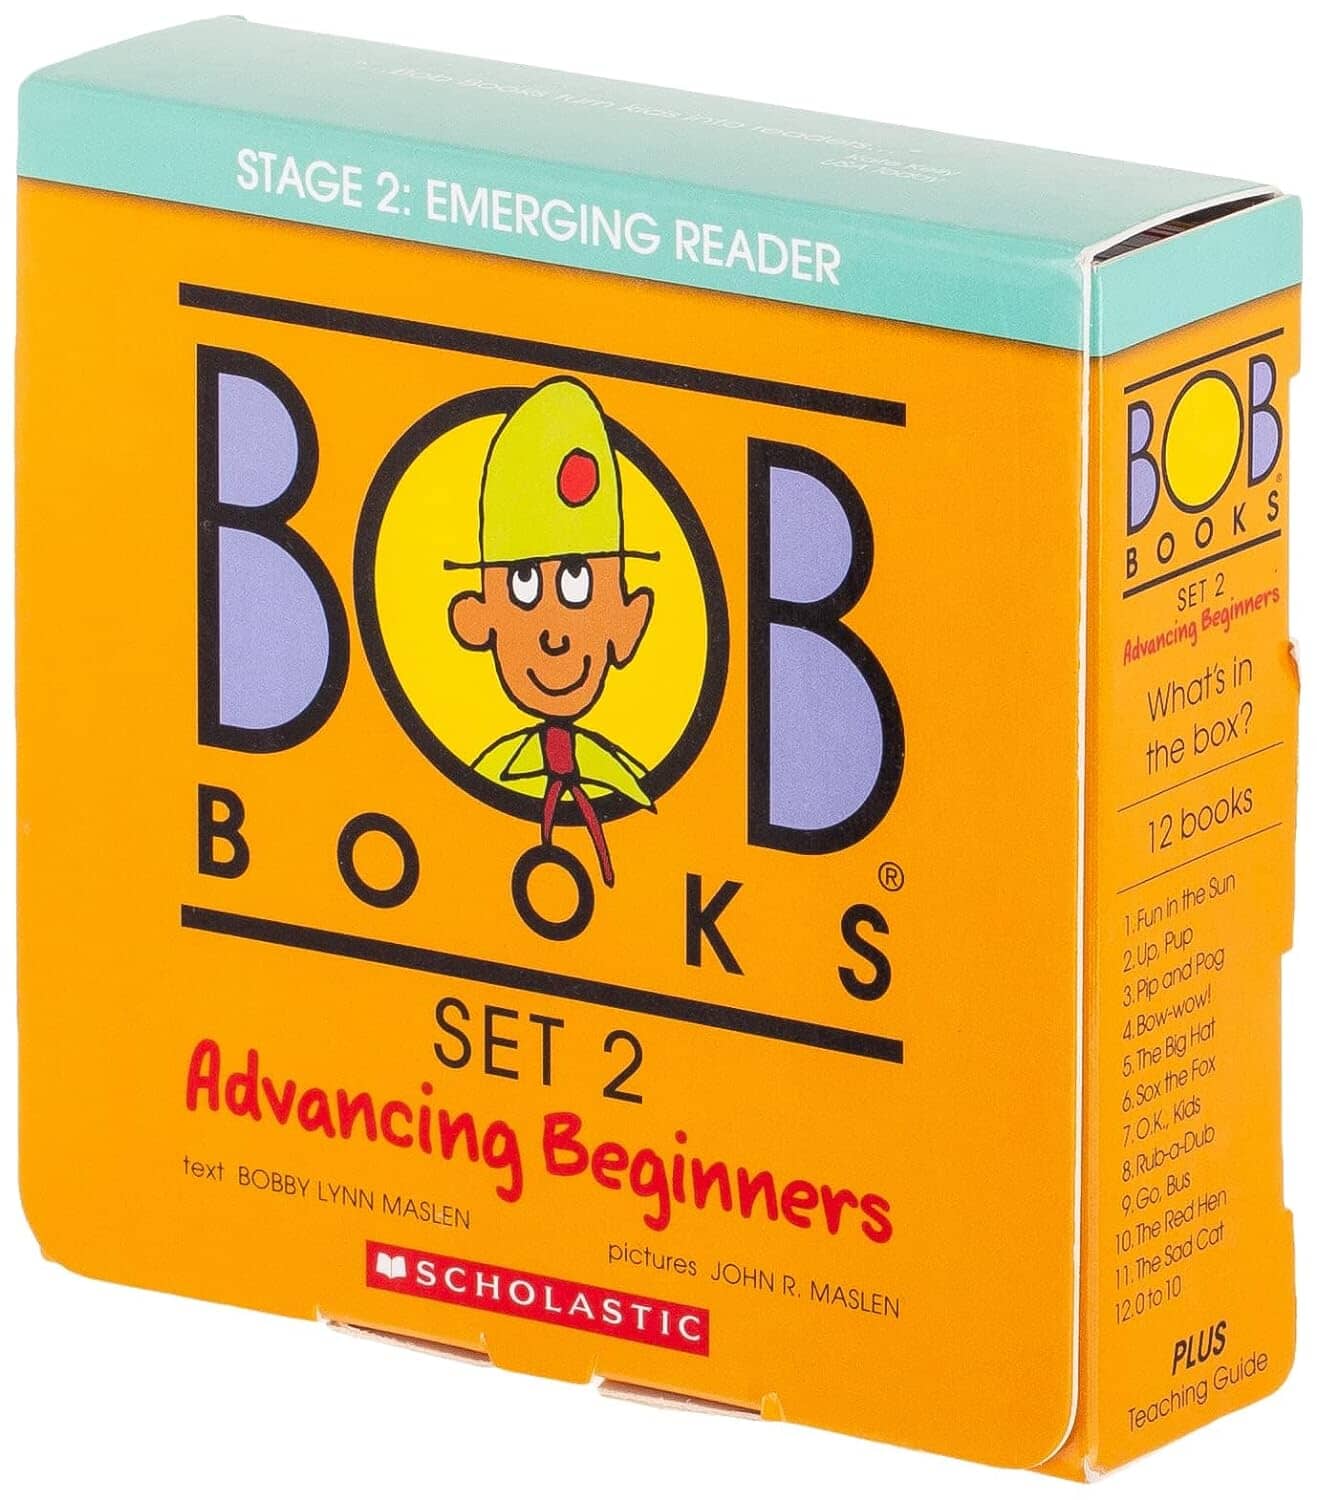 Bob Books Set 2: Advancing Beginners (Stage 2: Emerging Reader) 12 Books Collection Set - Ages 3-6 - Paperback Scholastic